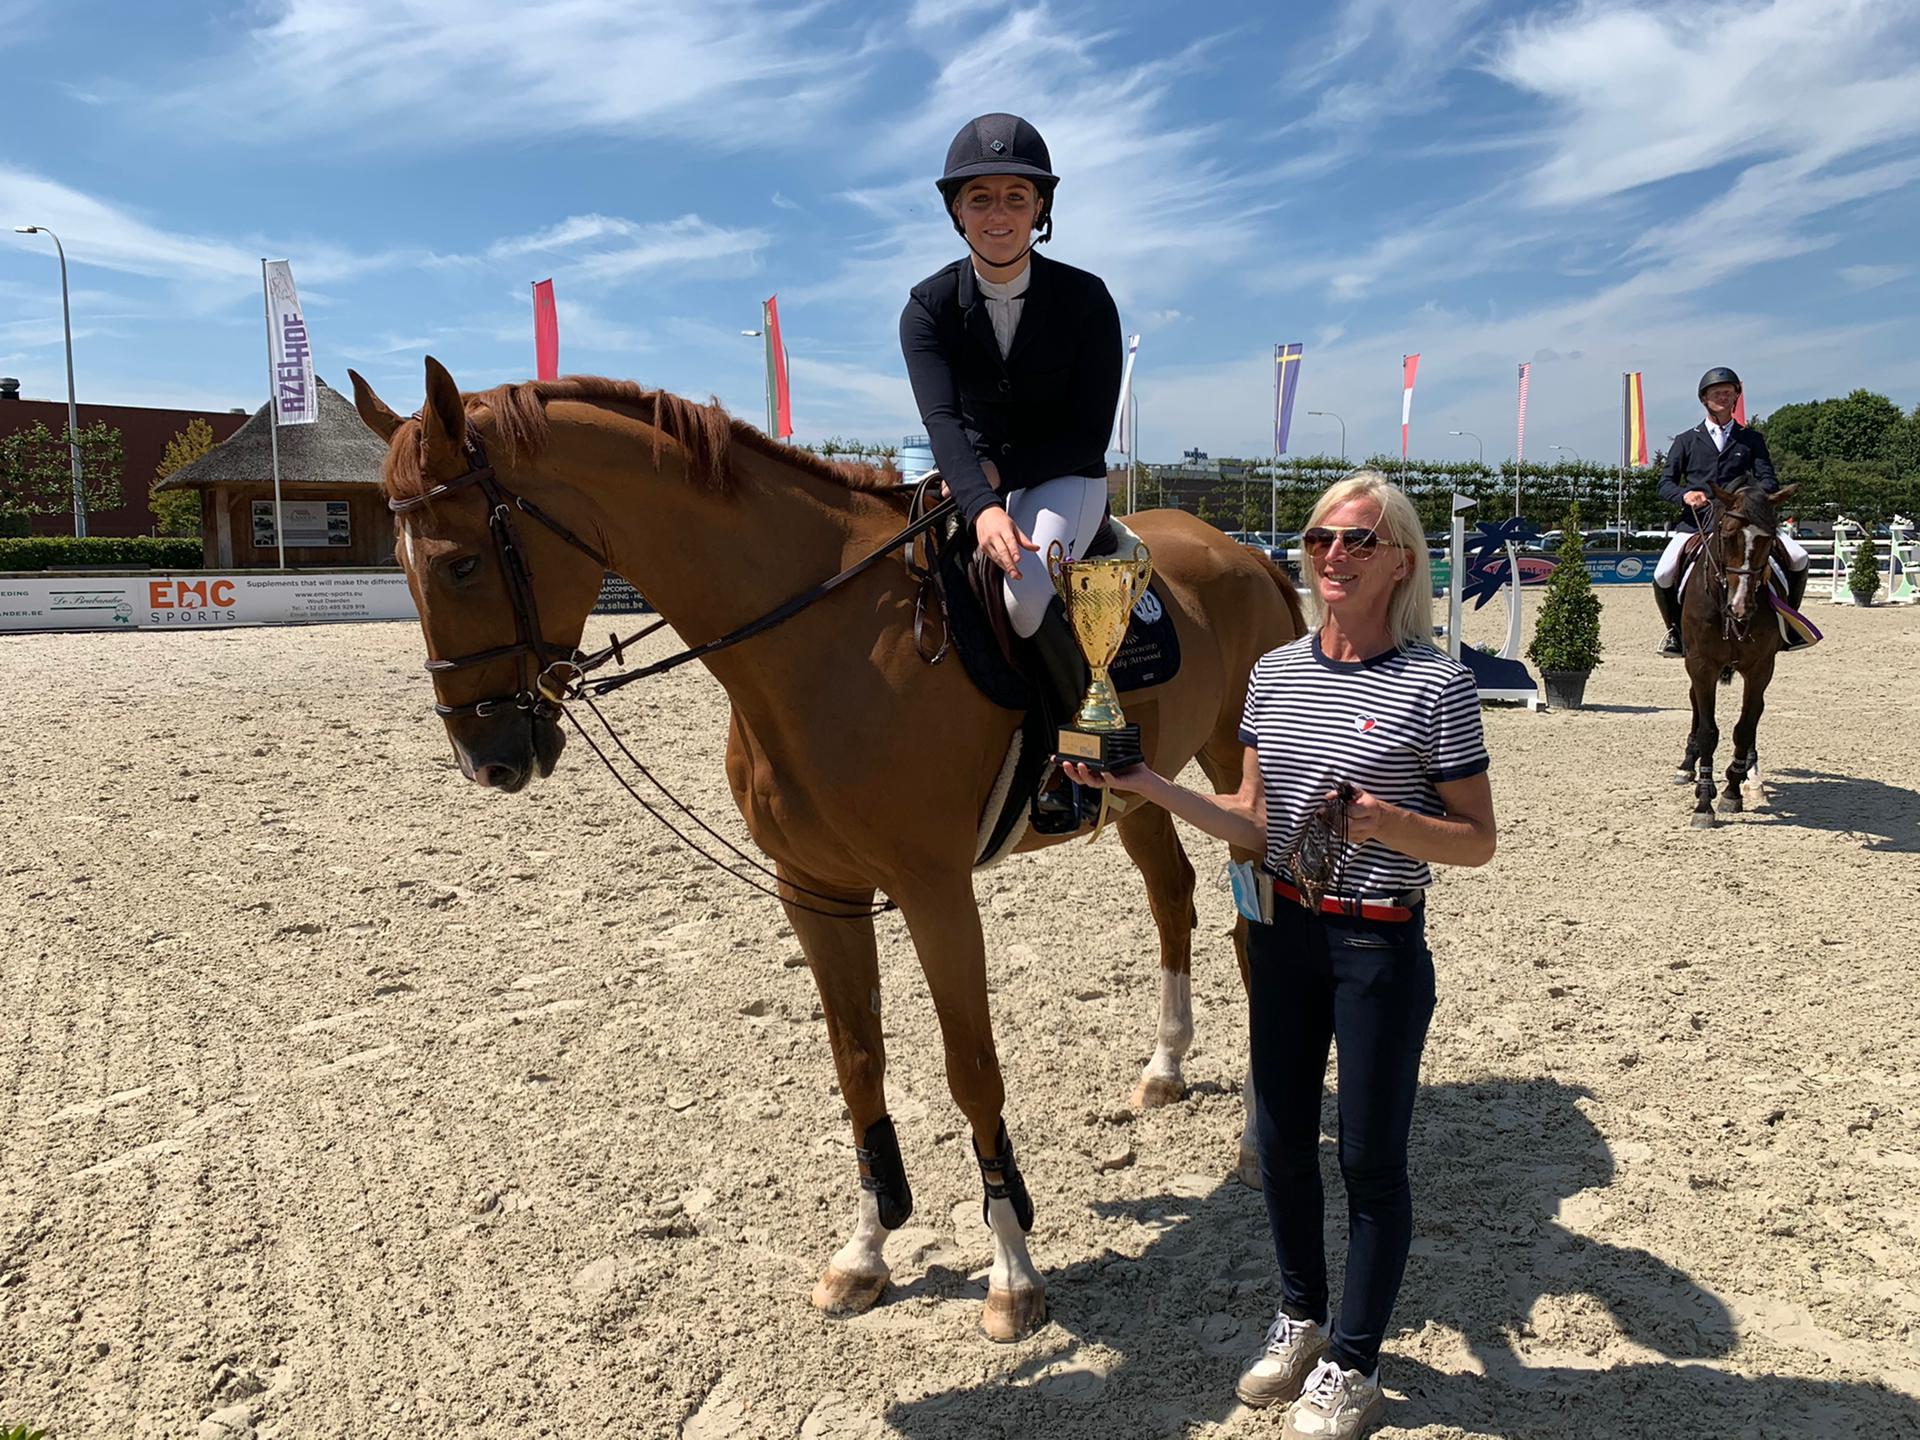 Lily Attwood jumps to victory at Grand Prix Fontainebleau